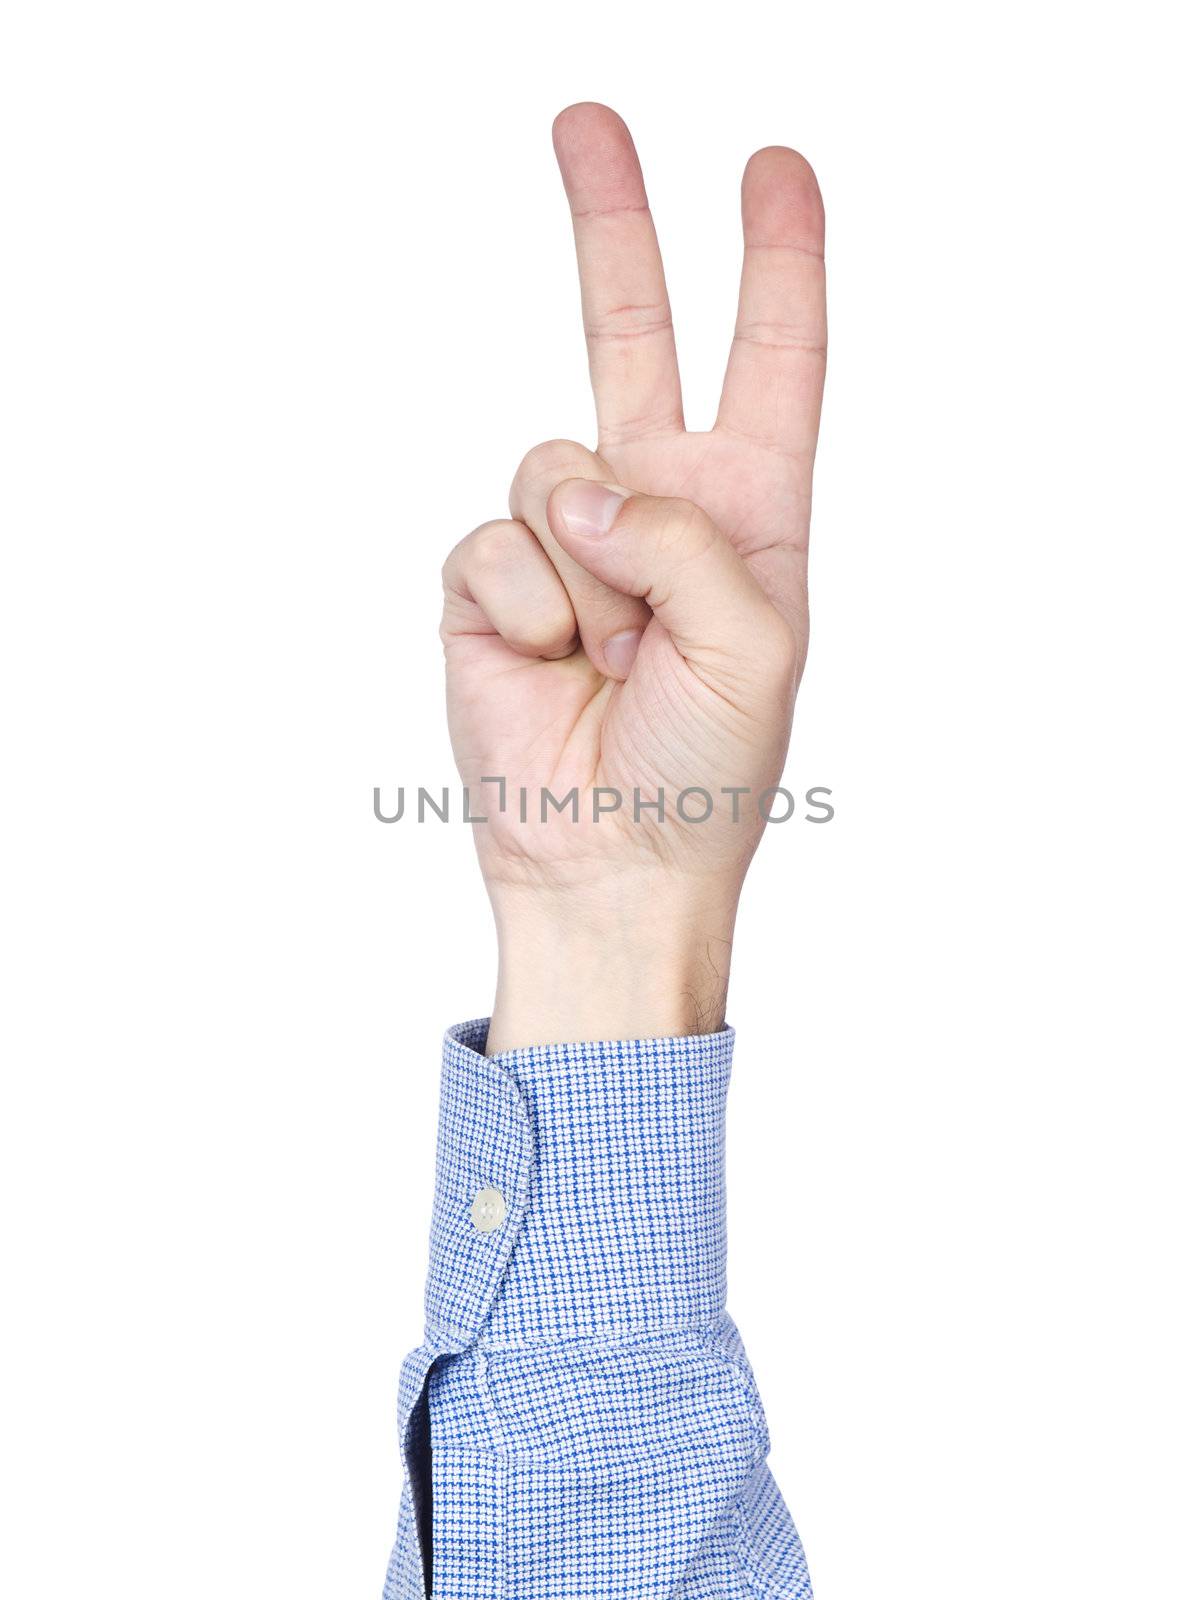 A man's hand doing number 2 gesture, isolated on white background.